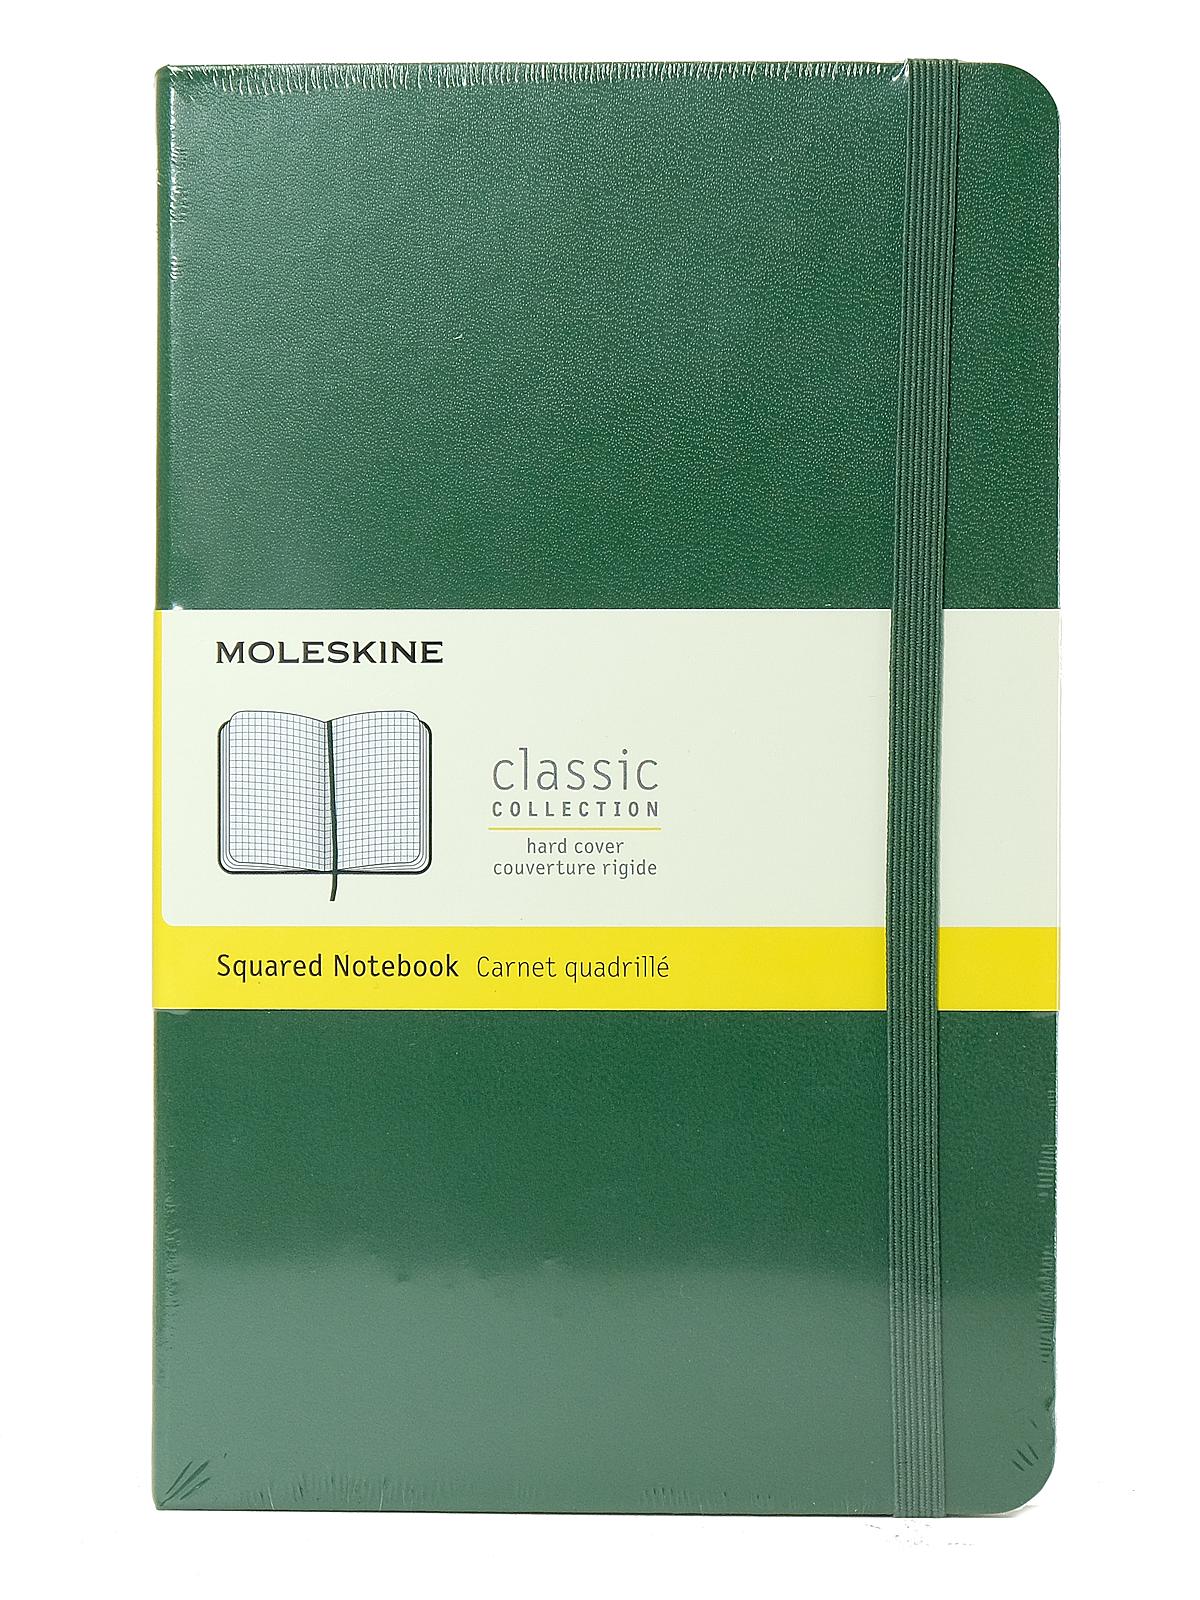 Classic Hard Cover Notebooks Myrtle Green 5 In. X 8 1 4 In. 240 Pages, Squared